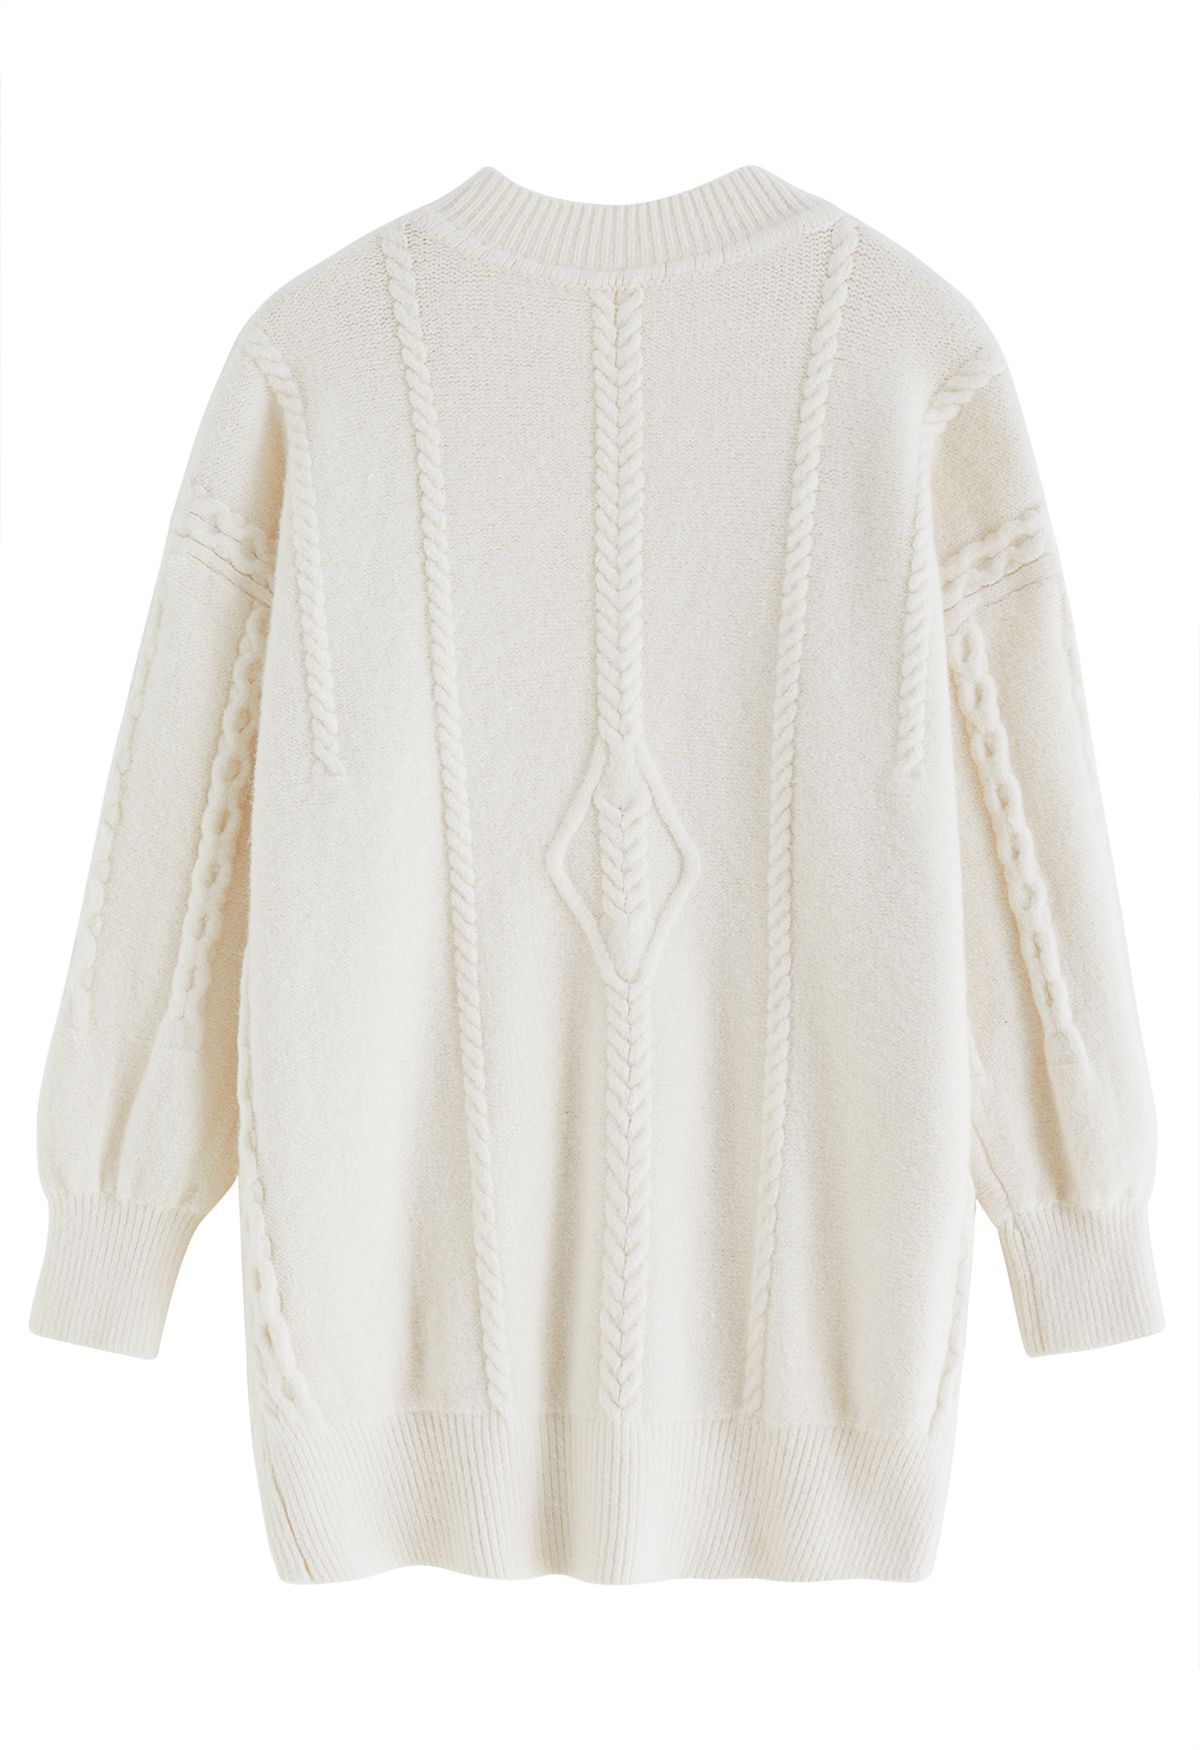 Pom-Pom Trim Cable Knit Sweater in Ivory - Retro, Indie and Unique Fashion